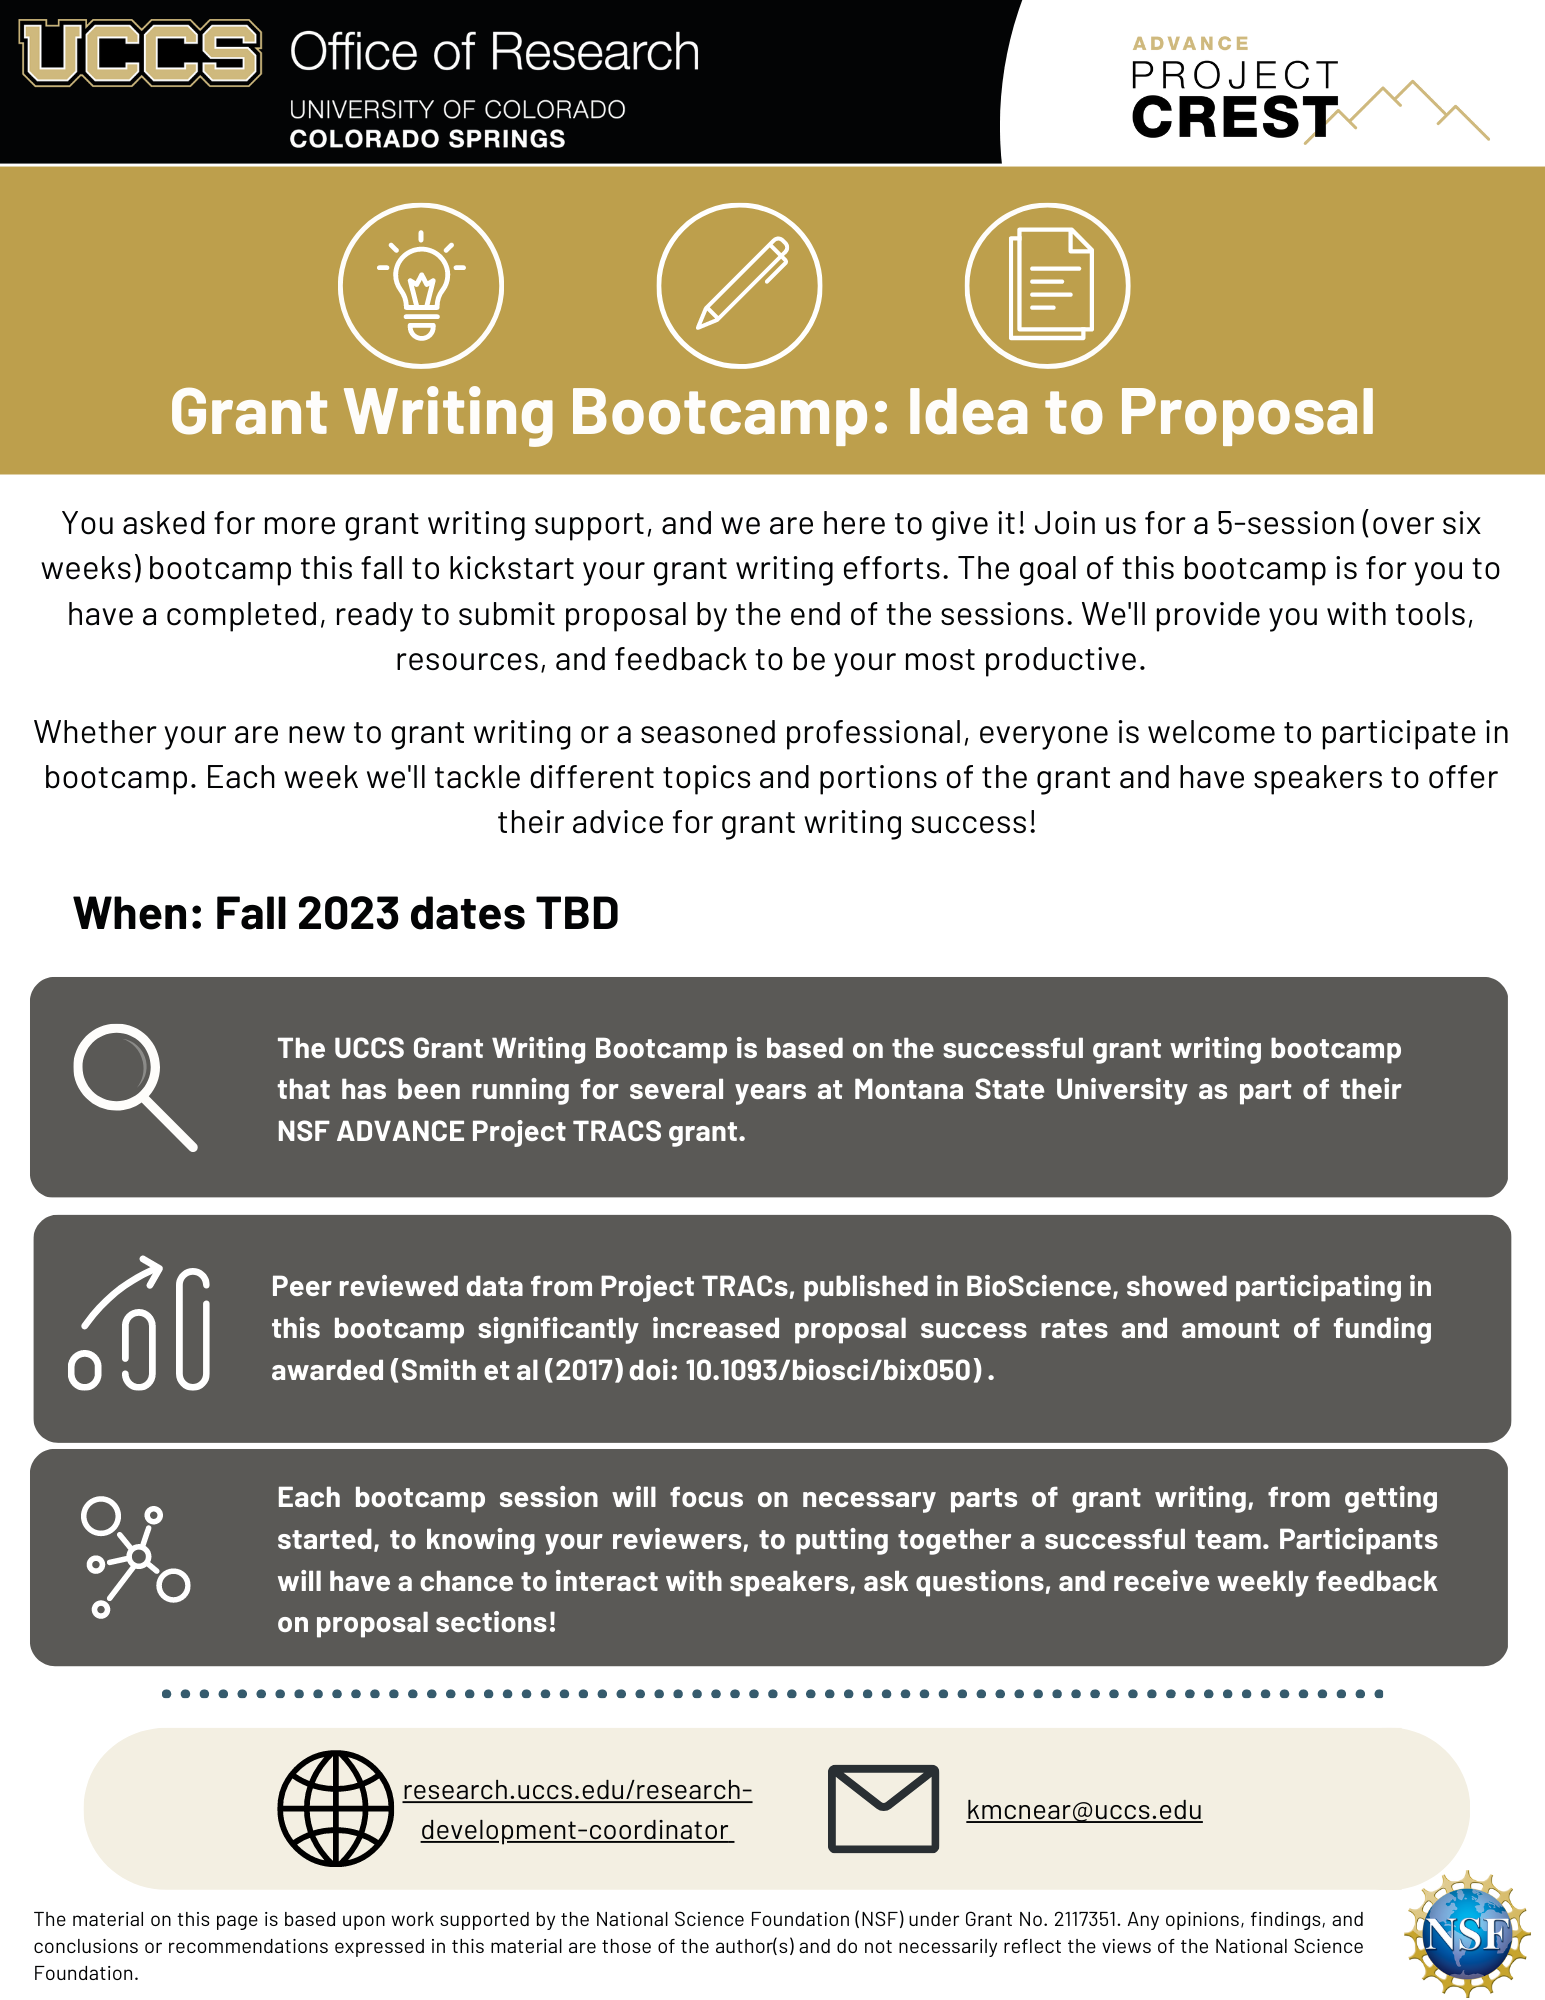 Fall 2022 Grant Writing Bootcamp Infographic